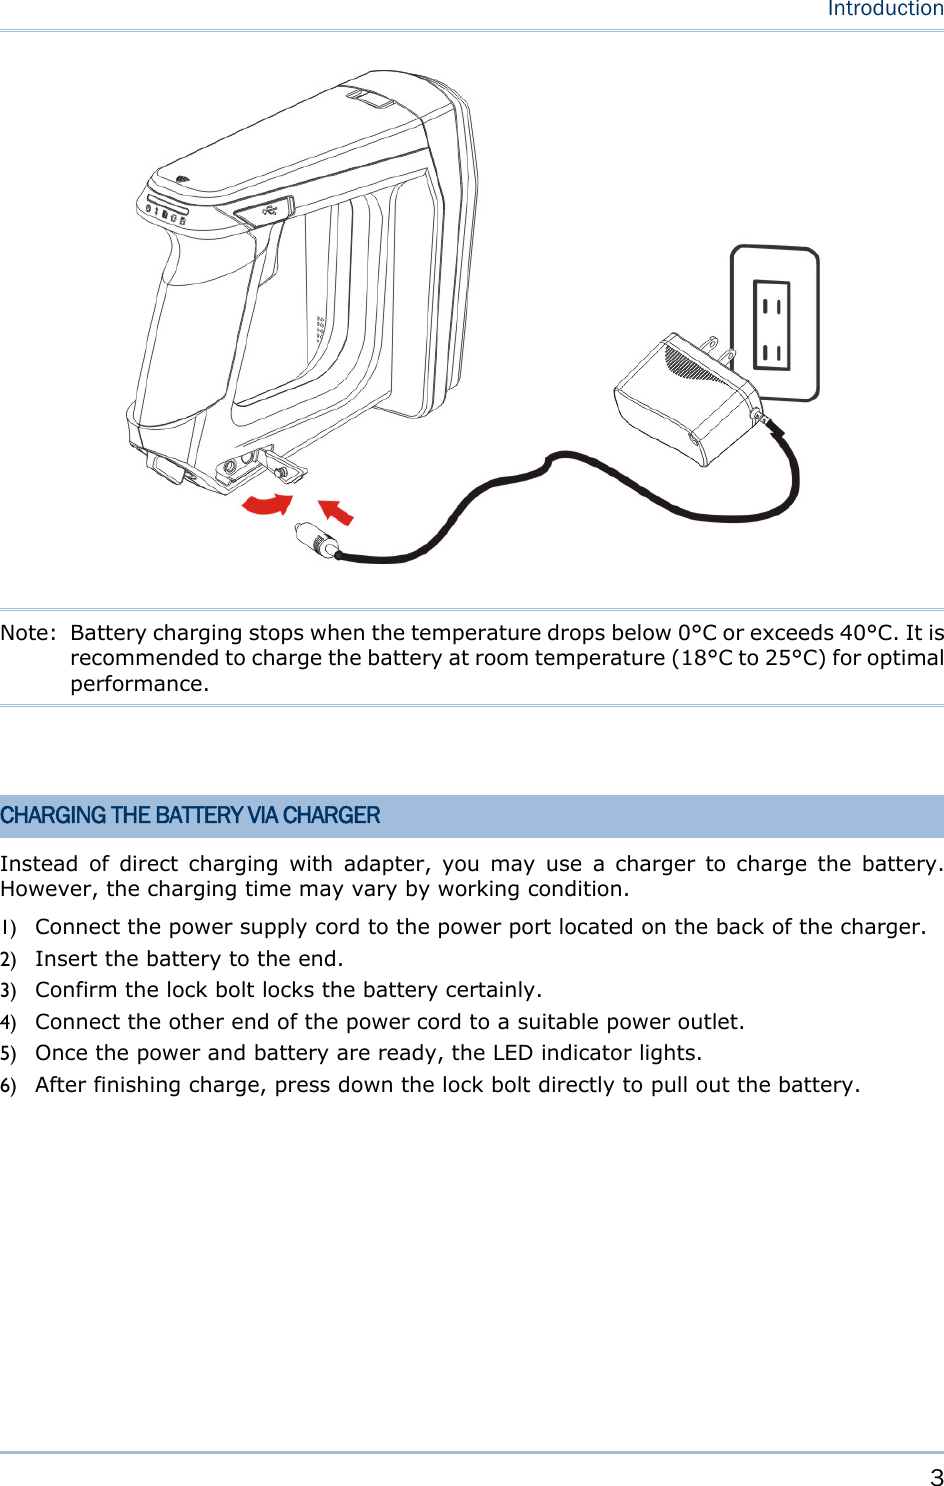     3   Introduction   Note:  Battery charging stops when the temperature drops below 0°C or exceeds 40°C. It is recommended to charge the battery at room temperature (18°C to 25°C) for optimal performance.   CHARGING THE BATTERY VIA CHARGER Instead of direct charging with adapter, you may use a charger to charge the battery. However, the charging time may vary by working condition. 1) Connect the power supply cord to the power port located on the back of the charger. 2) Insert the battery to the end. 3) Confirm the lock bolt locks the battery certainly. 4) Connect the other end of the power cord to a suitable power outlet. 5) Once the power and battery are ready, the LED indicator lights. 6) After finishing charge, press down the lock bolt directly to pull out the battery.  